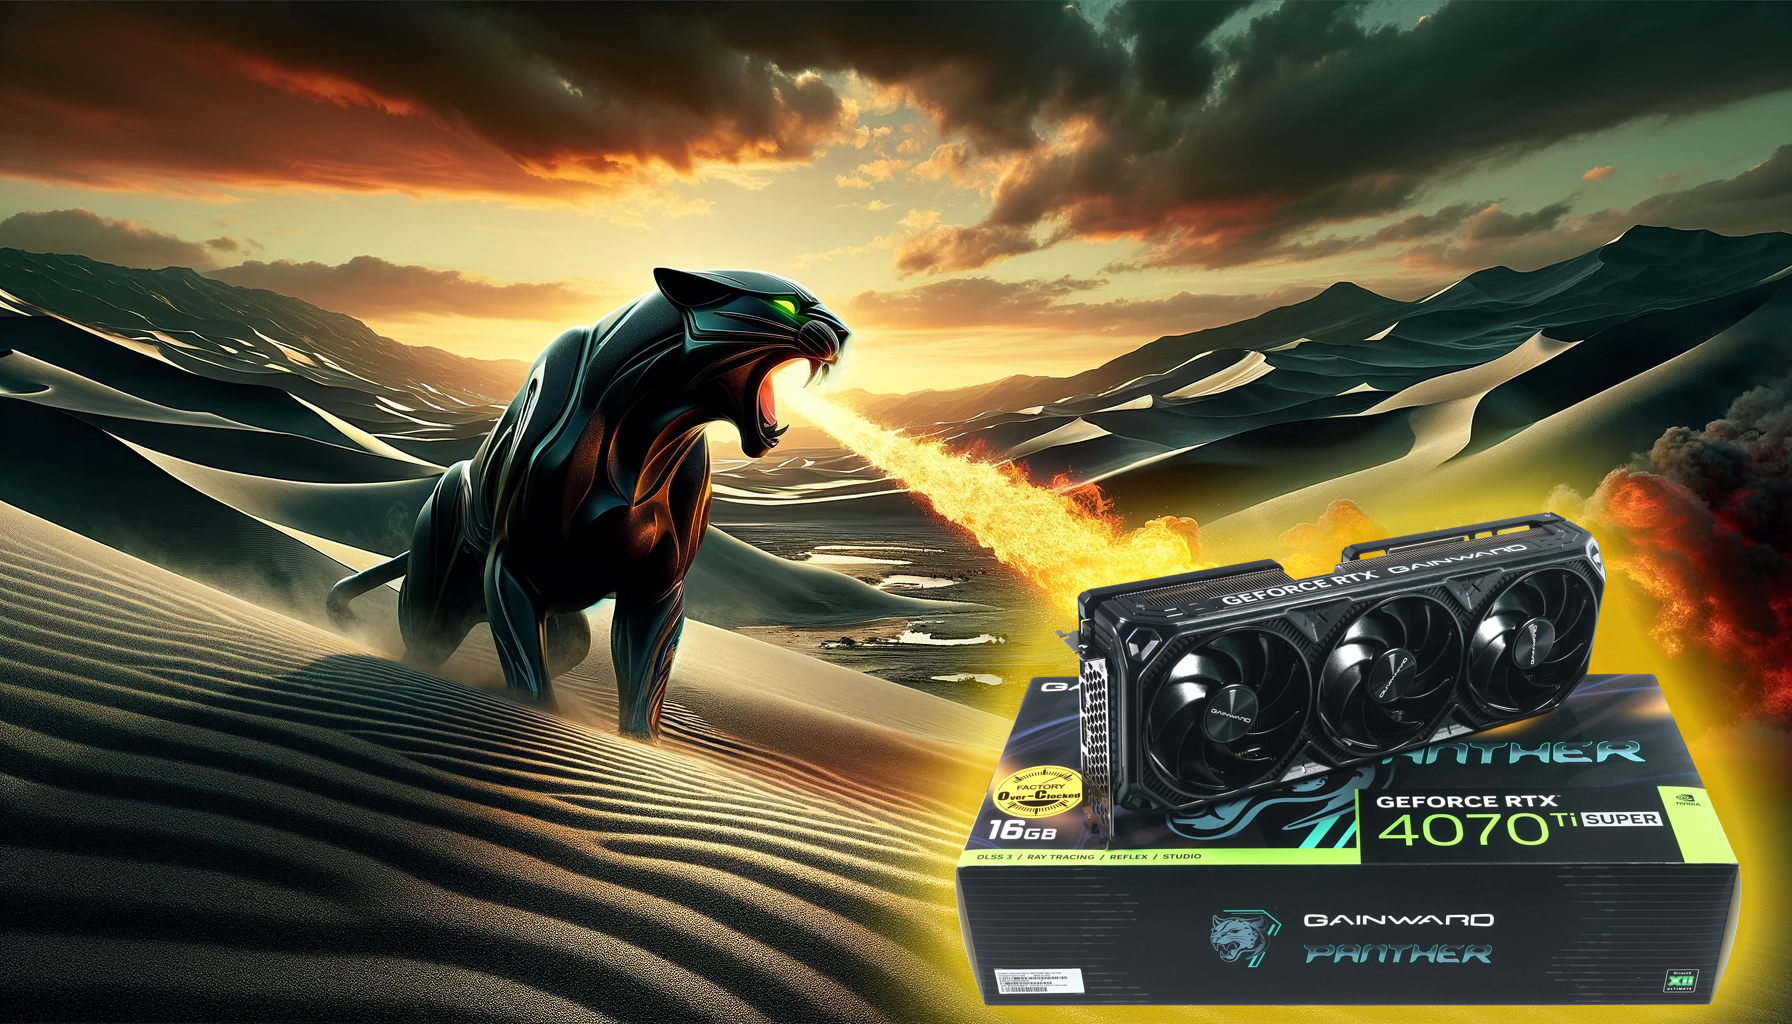 Gainward GeForce RTX 4070 Ti Super Panther 3X 16 GB review - Another MSRP  card, but with a heavyweight cooler